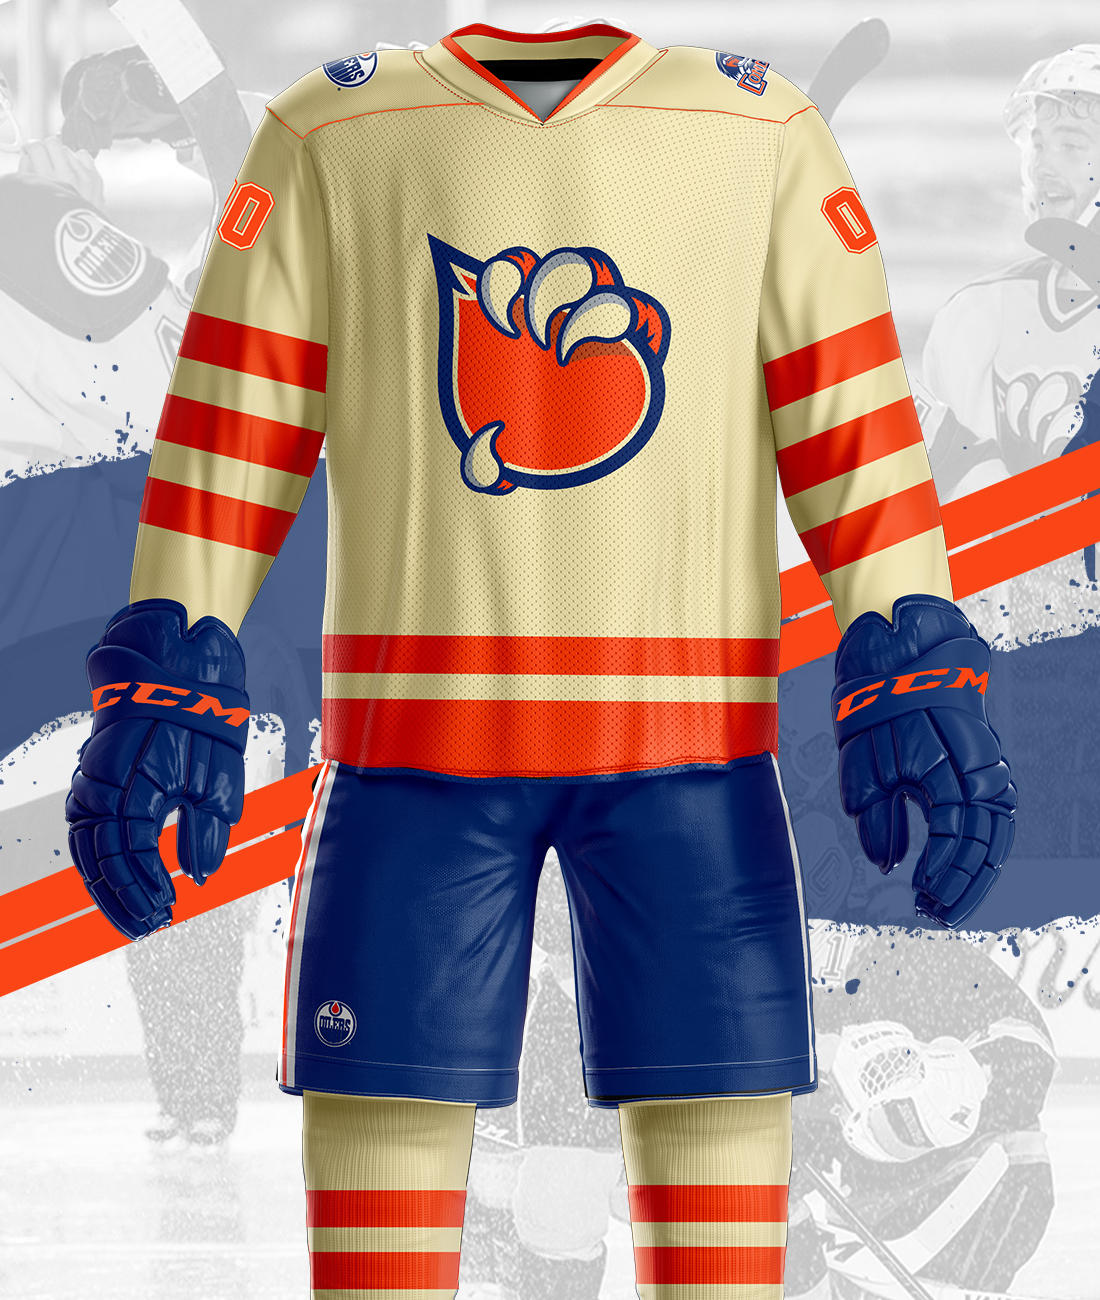 Oilers reveal alternate jersey for upcoming season